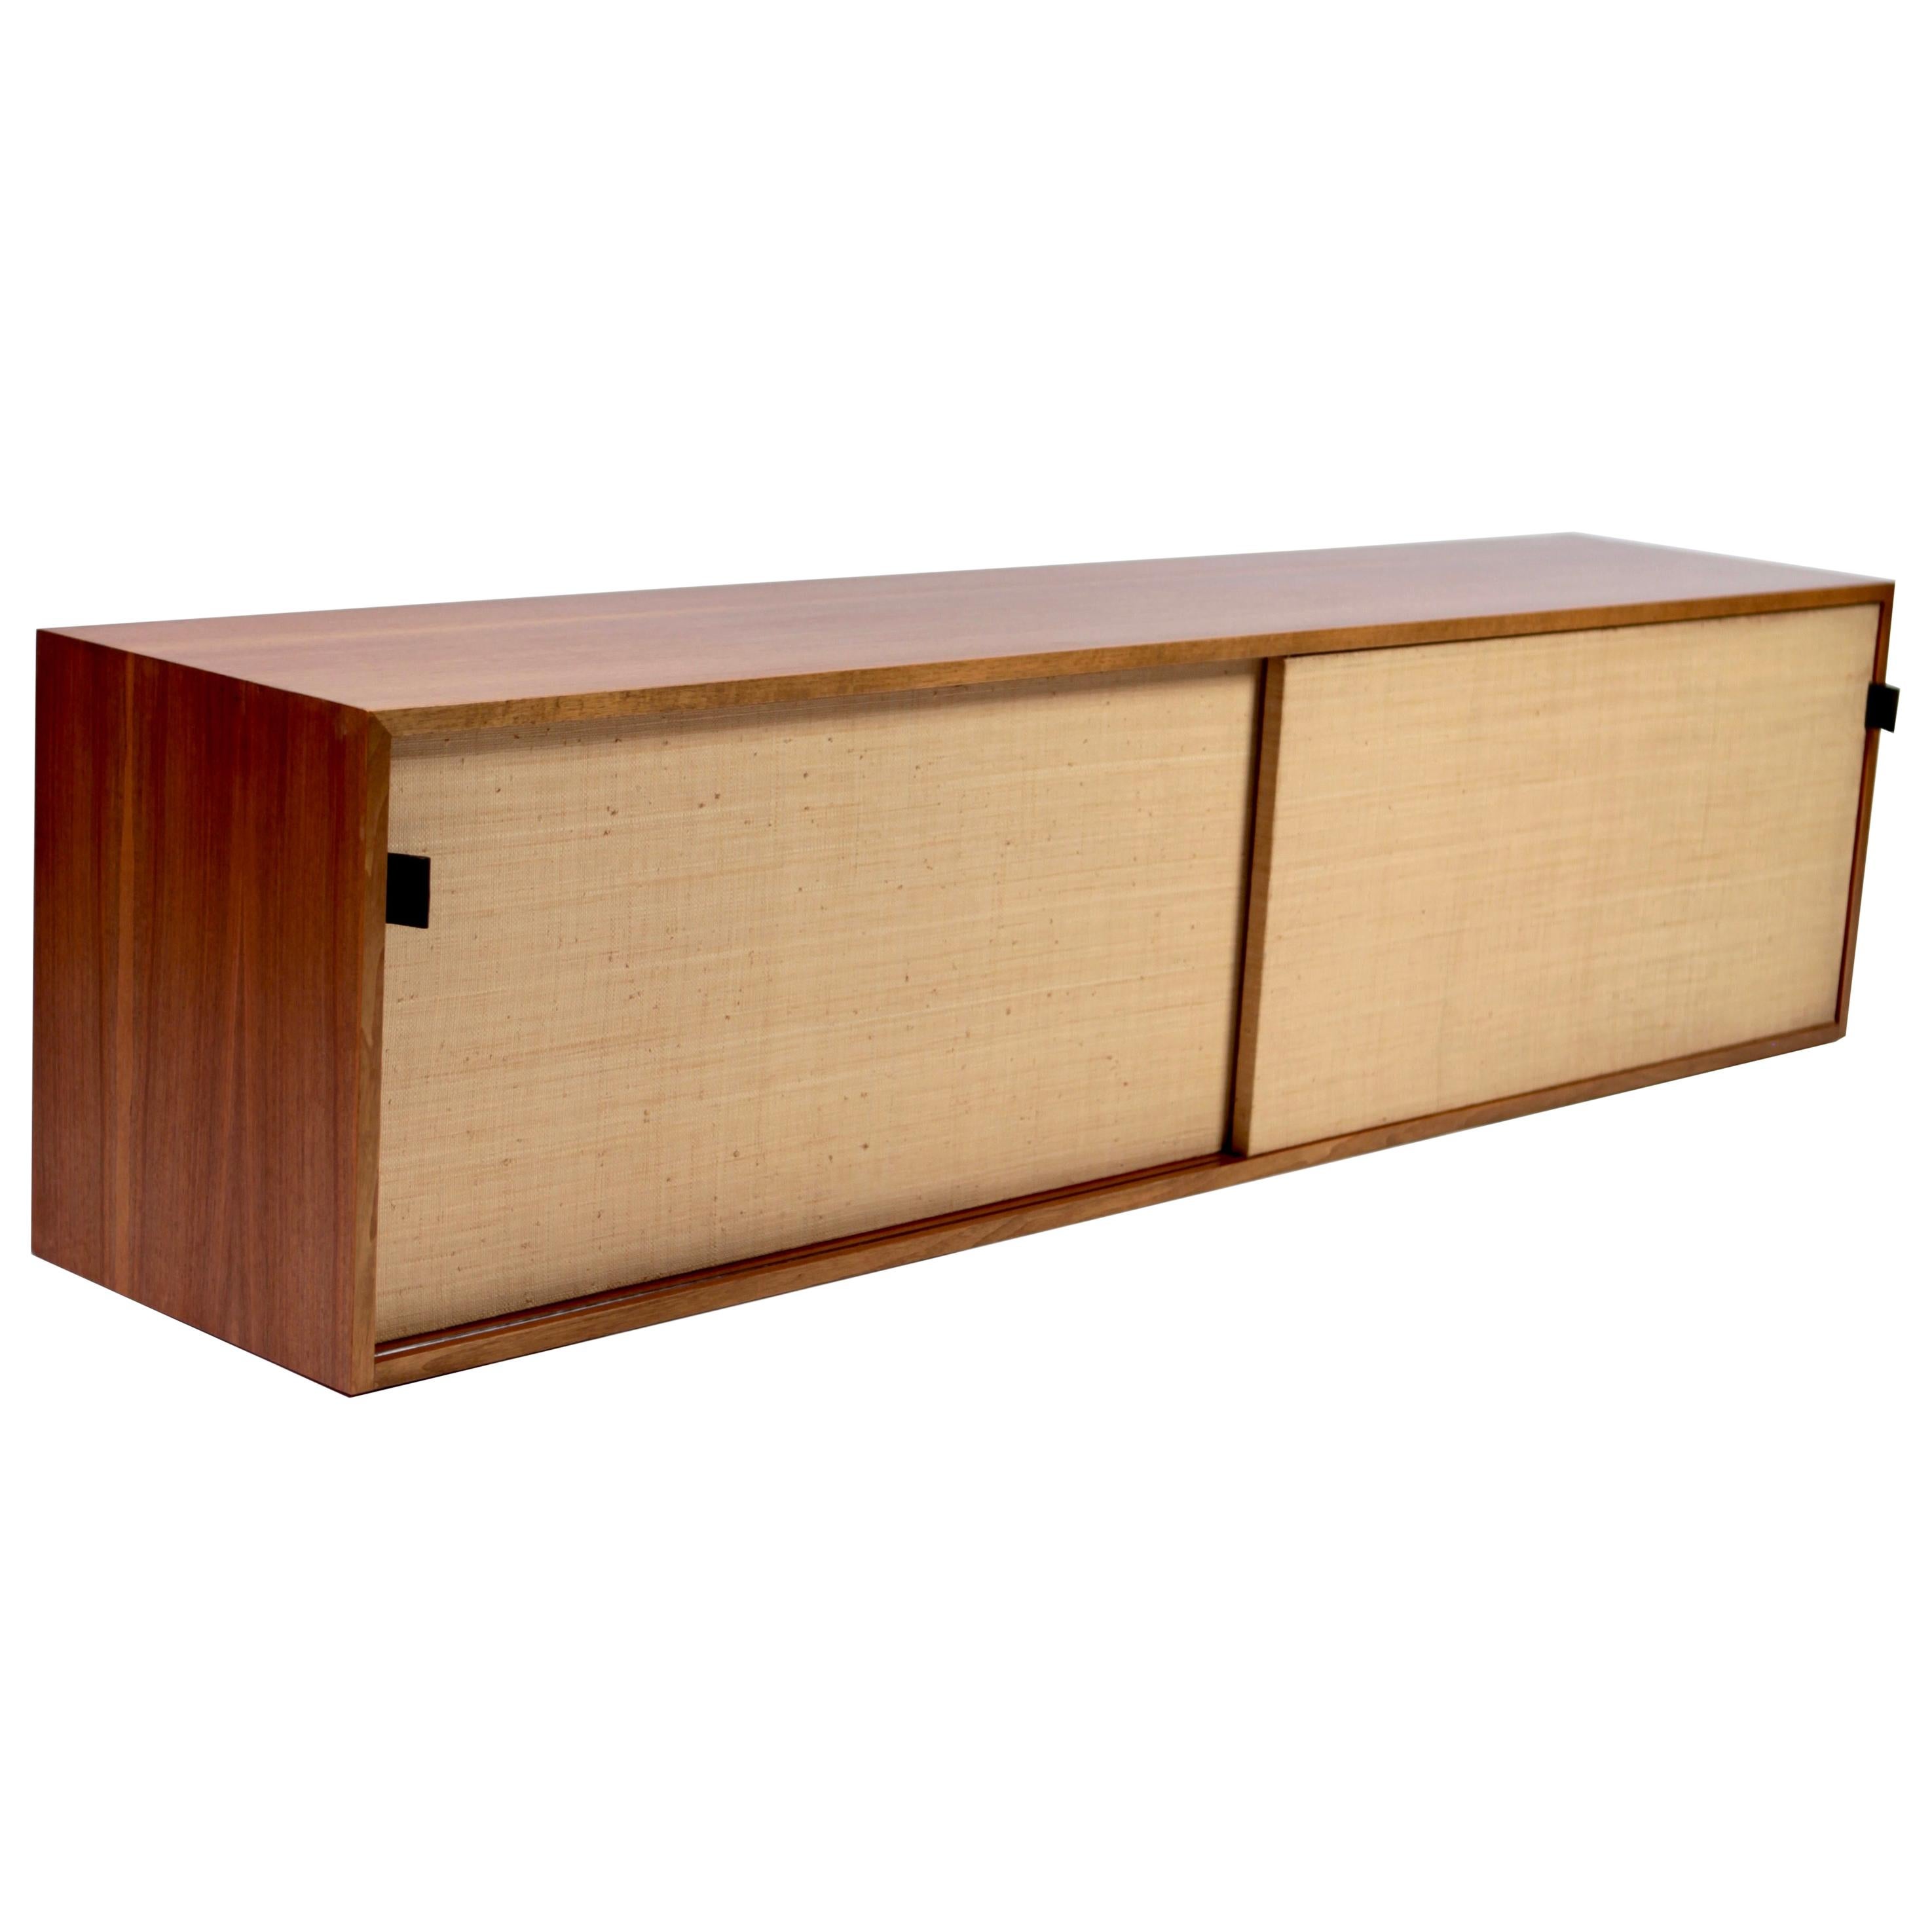 Sideboard in Teak & Seagrass by Florence Knoll, Designed 1947